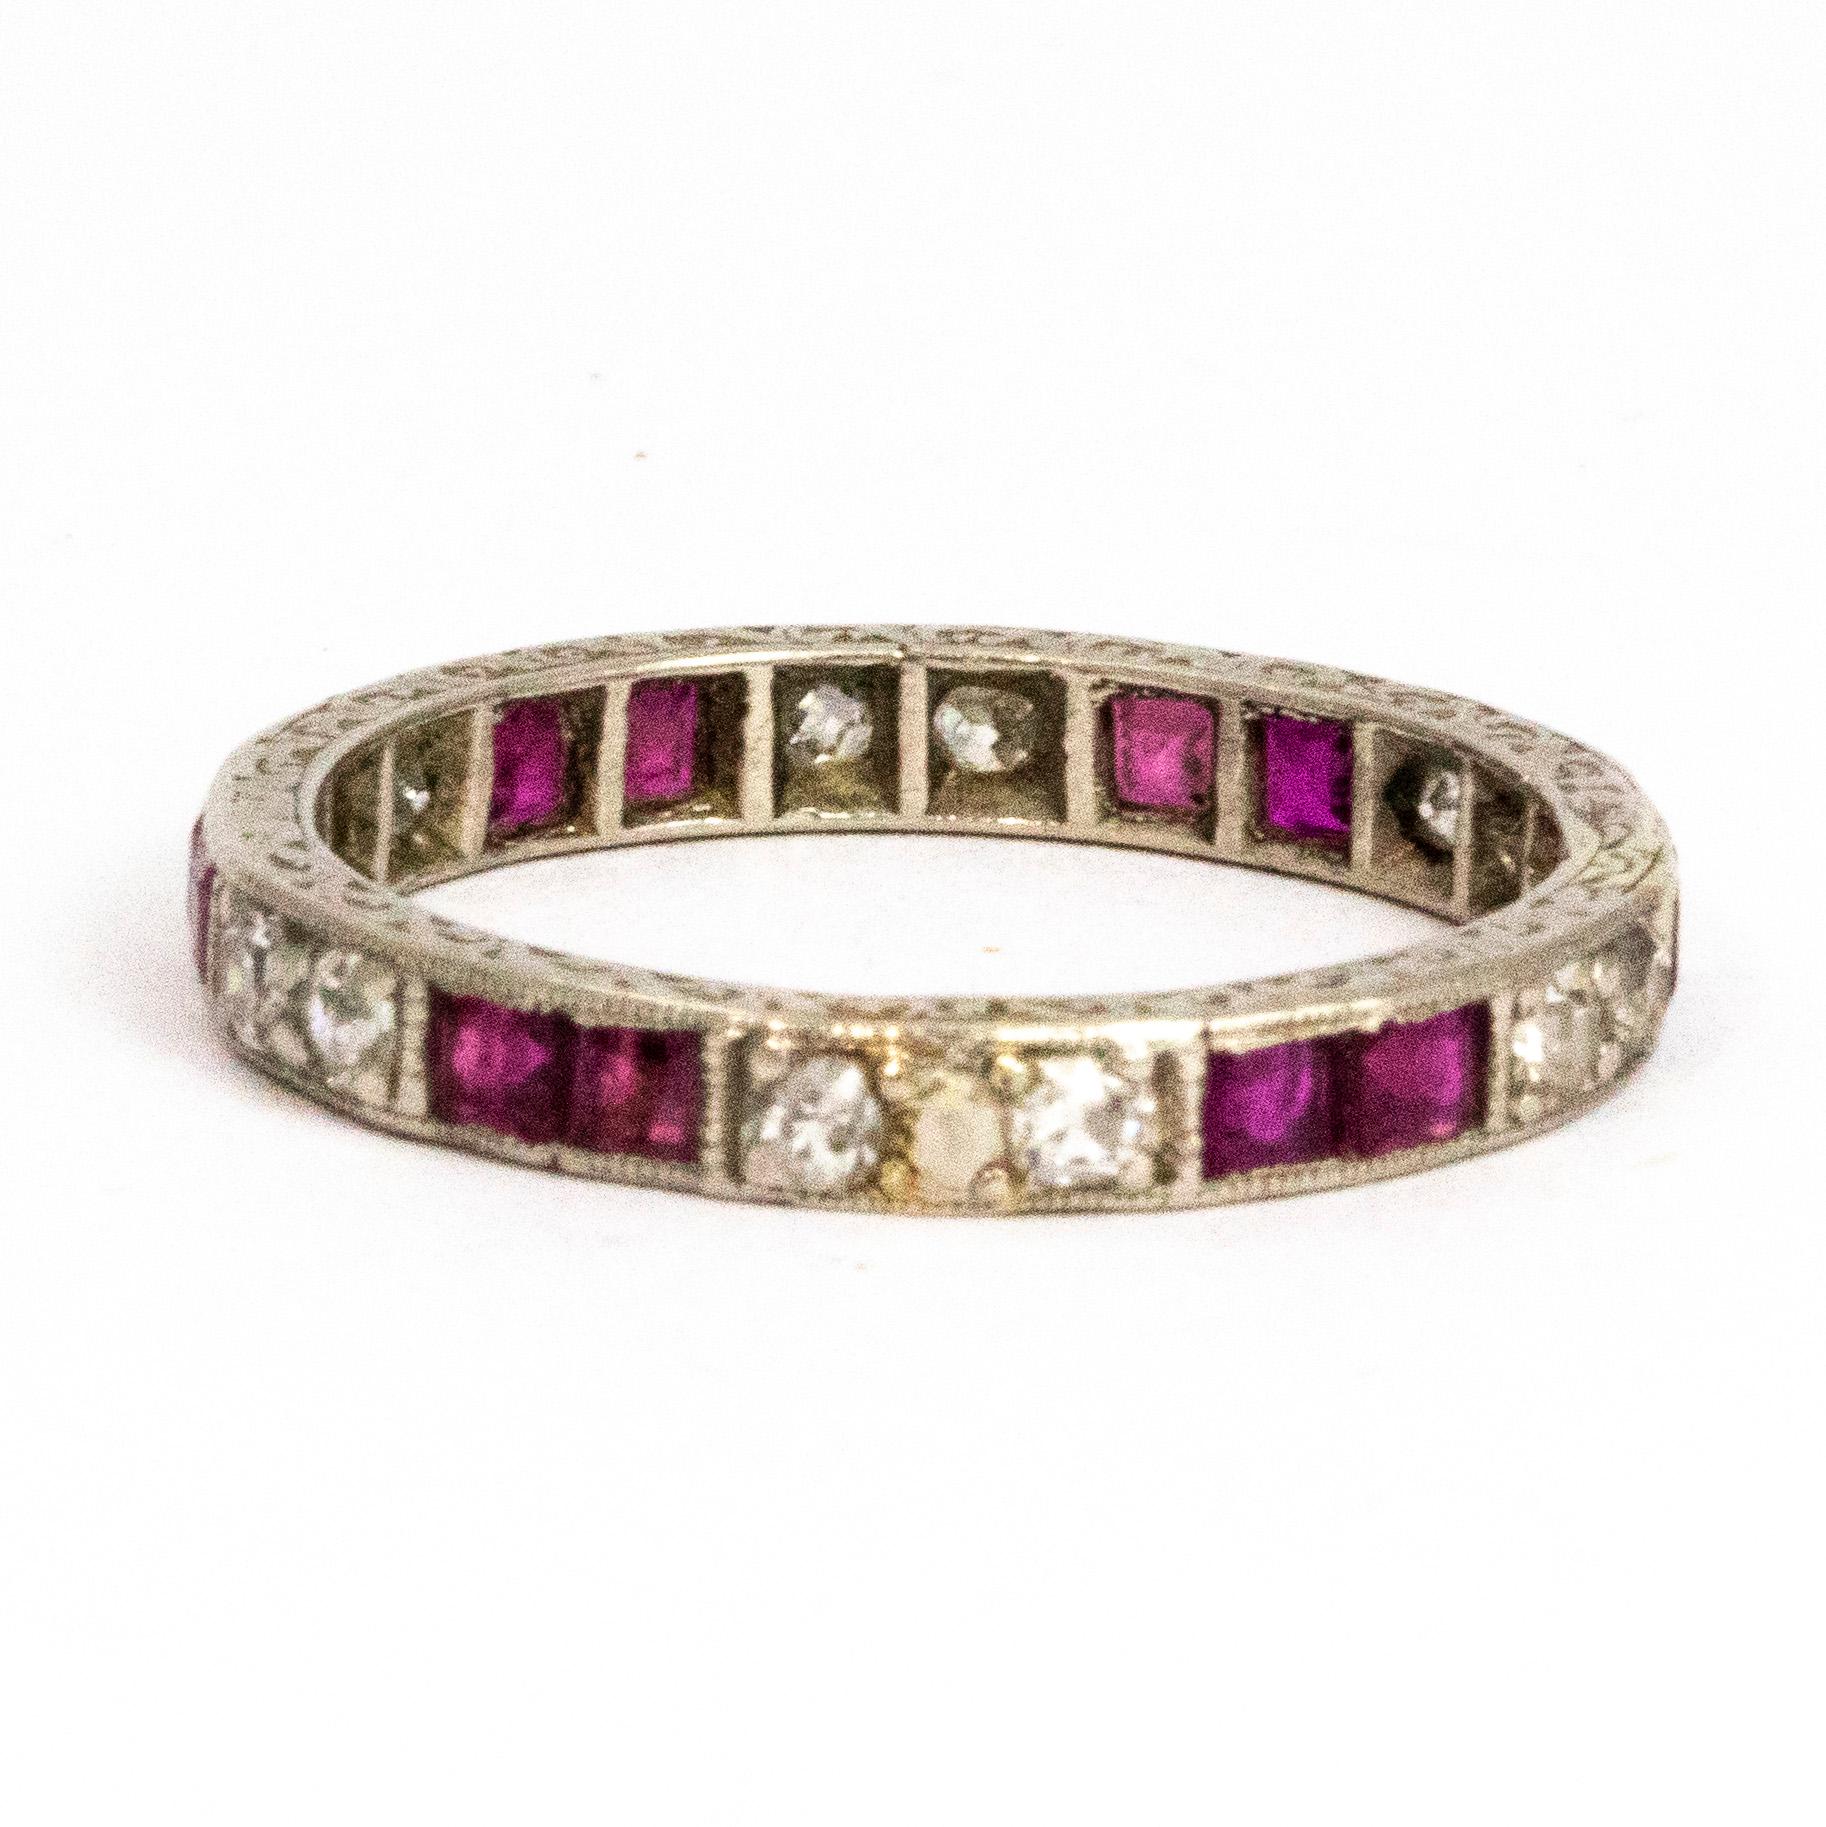 This wonderful ruby and diamond Art Deco style eternity boasts a total of 12 10pt rubies and 13 7pt diamonds. The sparkle is gorgeous and the diamonds next to the rubies make the stones pop. The stones re all set in platinum. 

Ring Size: M 1/2 or 6